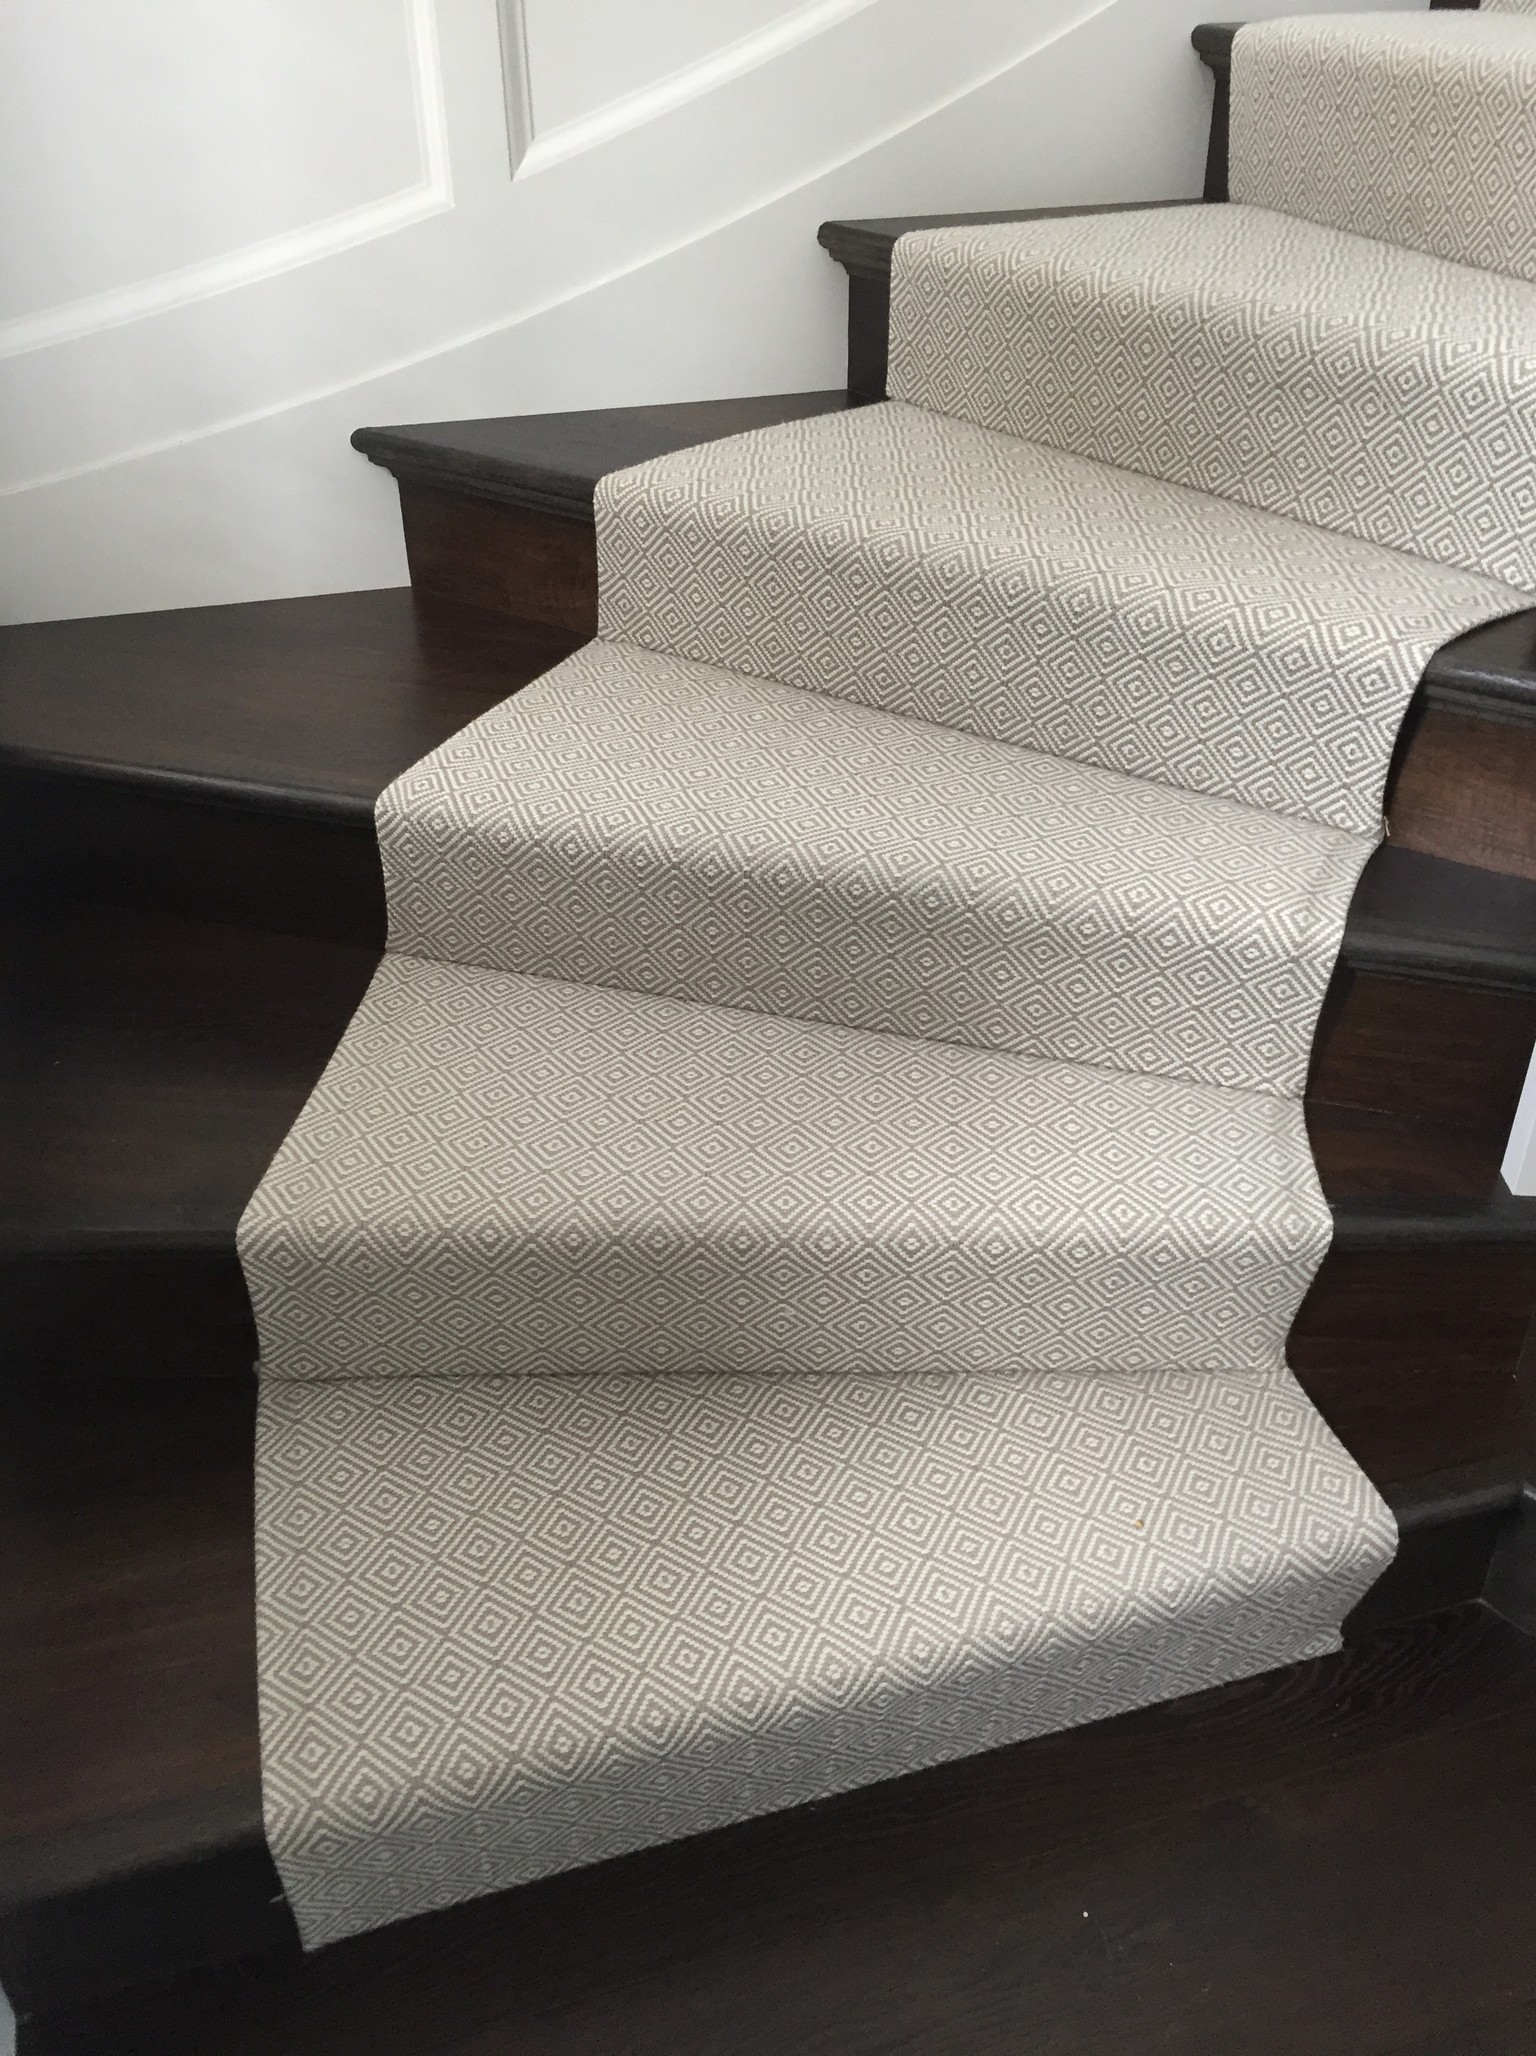 Stair Runners Gallery Page - The 